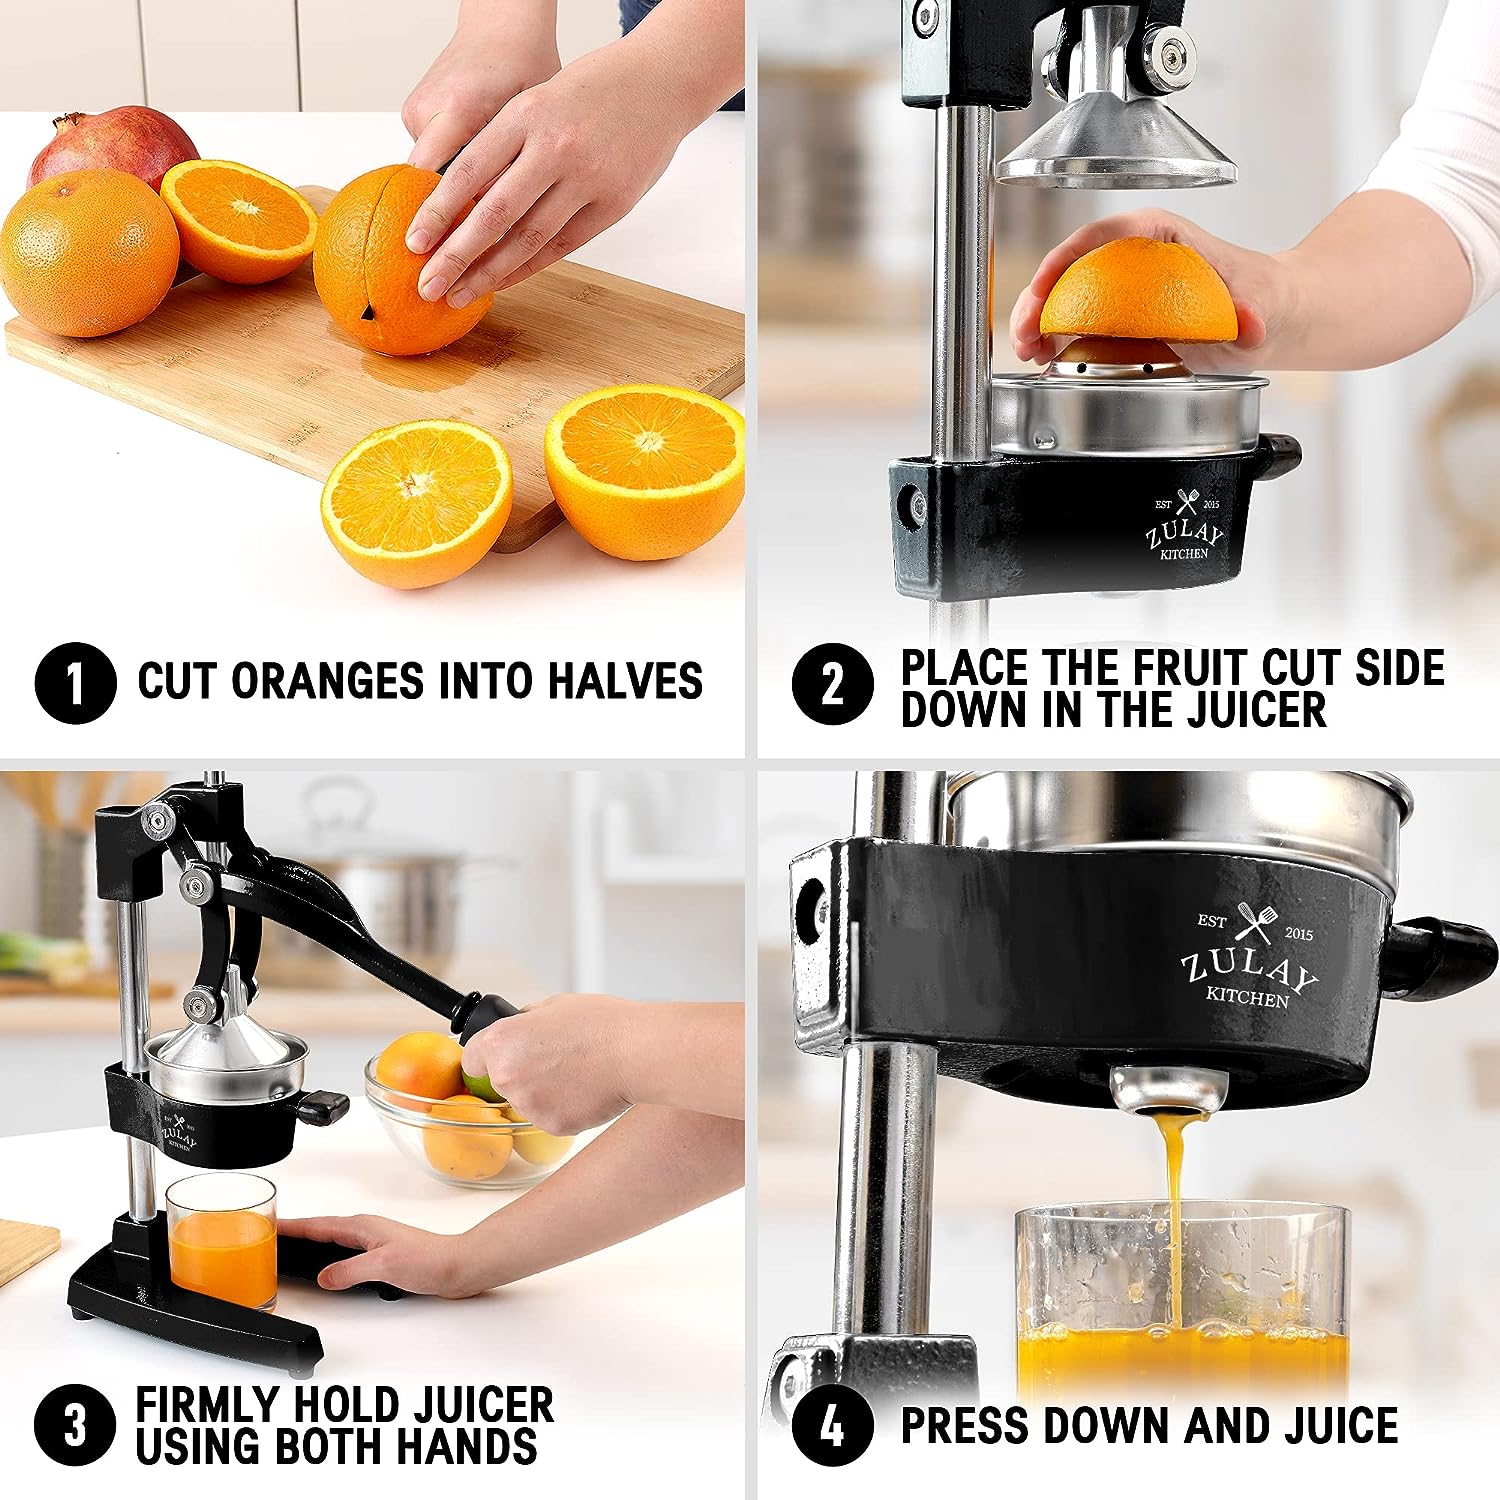 How to use Zulay Kitchen PROFESSIONAL HEAVY DUTY CITRUS JUICER